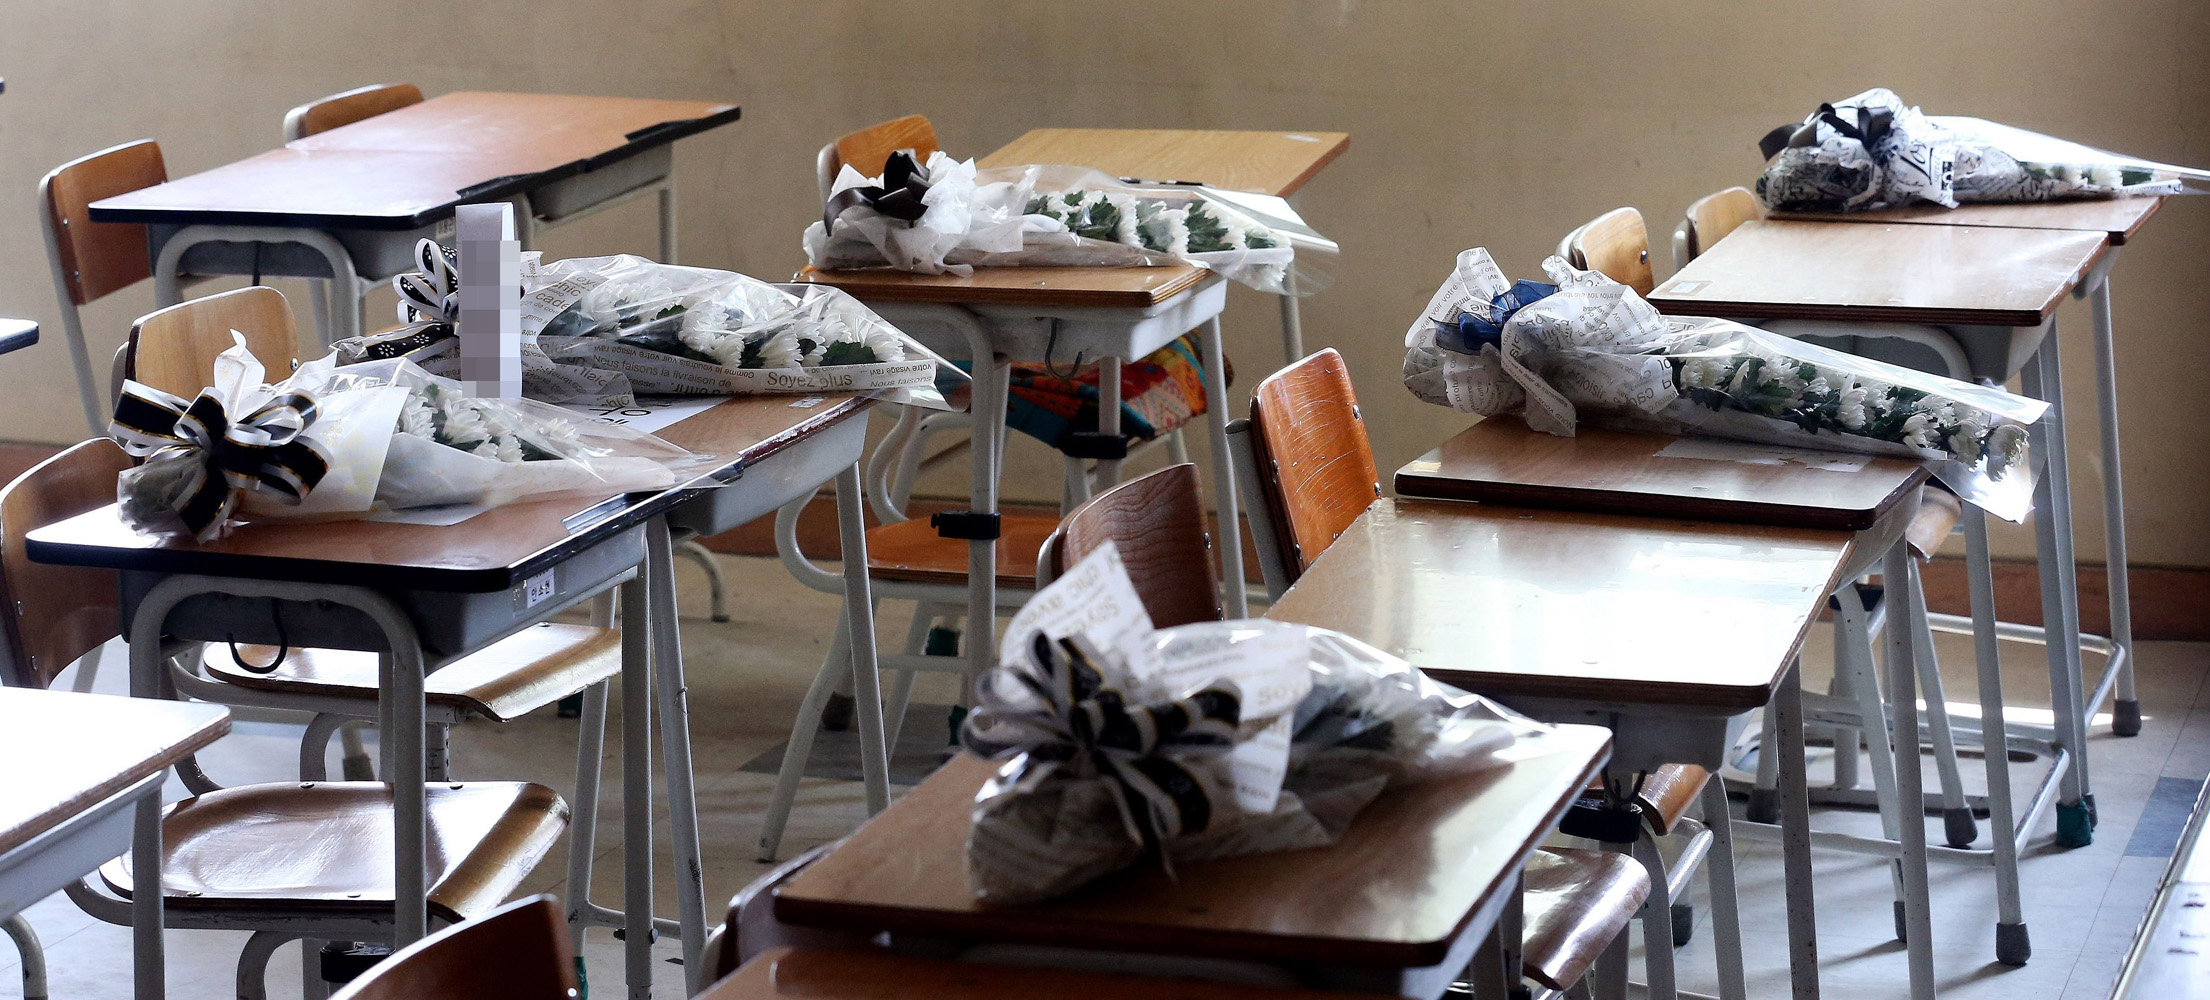 Apr. 23, 2014. Flowers are seen on the desks of students killed in the sunken South Korean ferry 'Sewol', at a classroom of Danwon high school in Ansan.